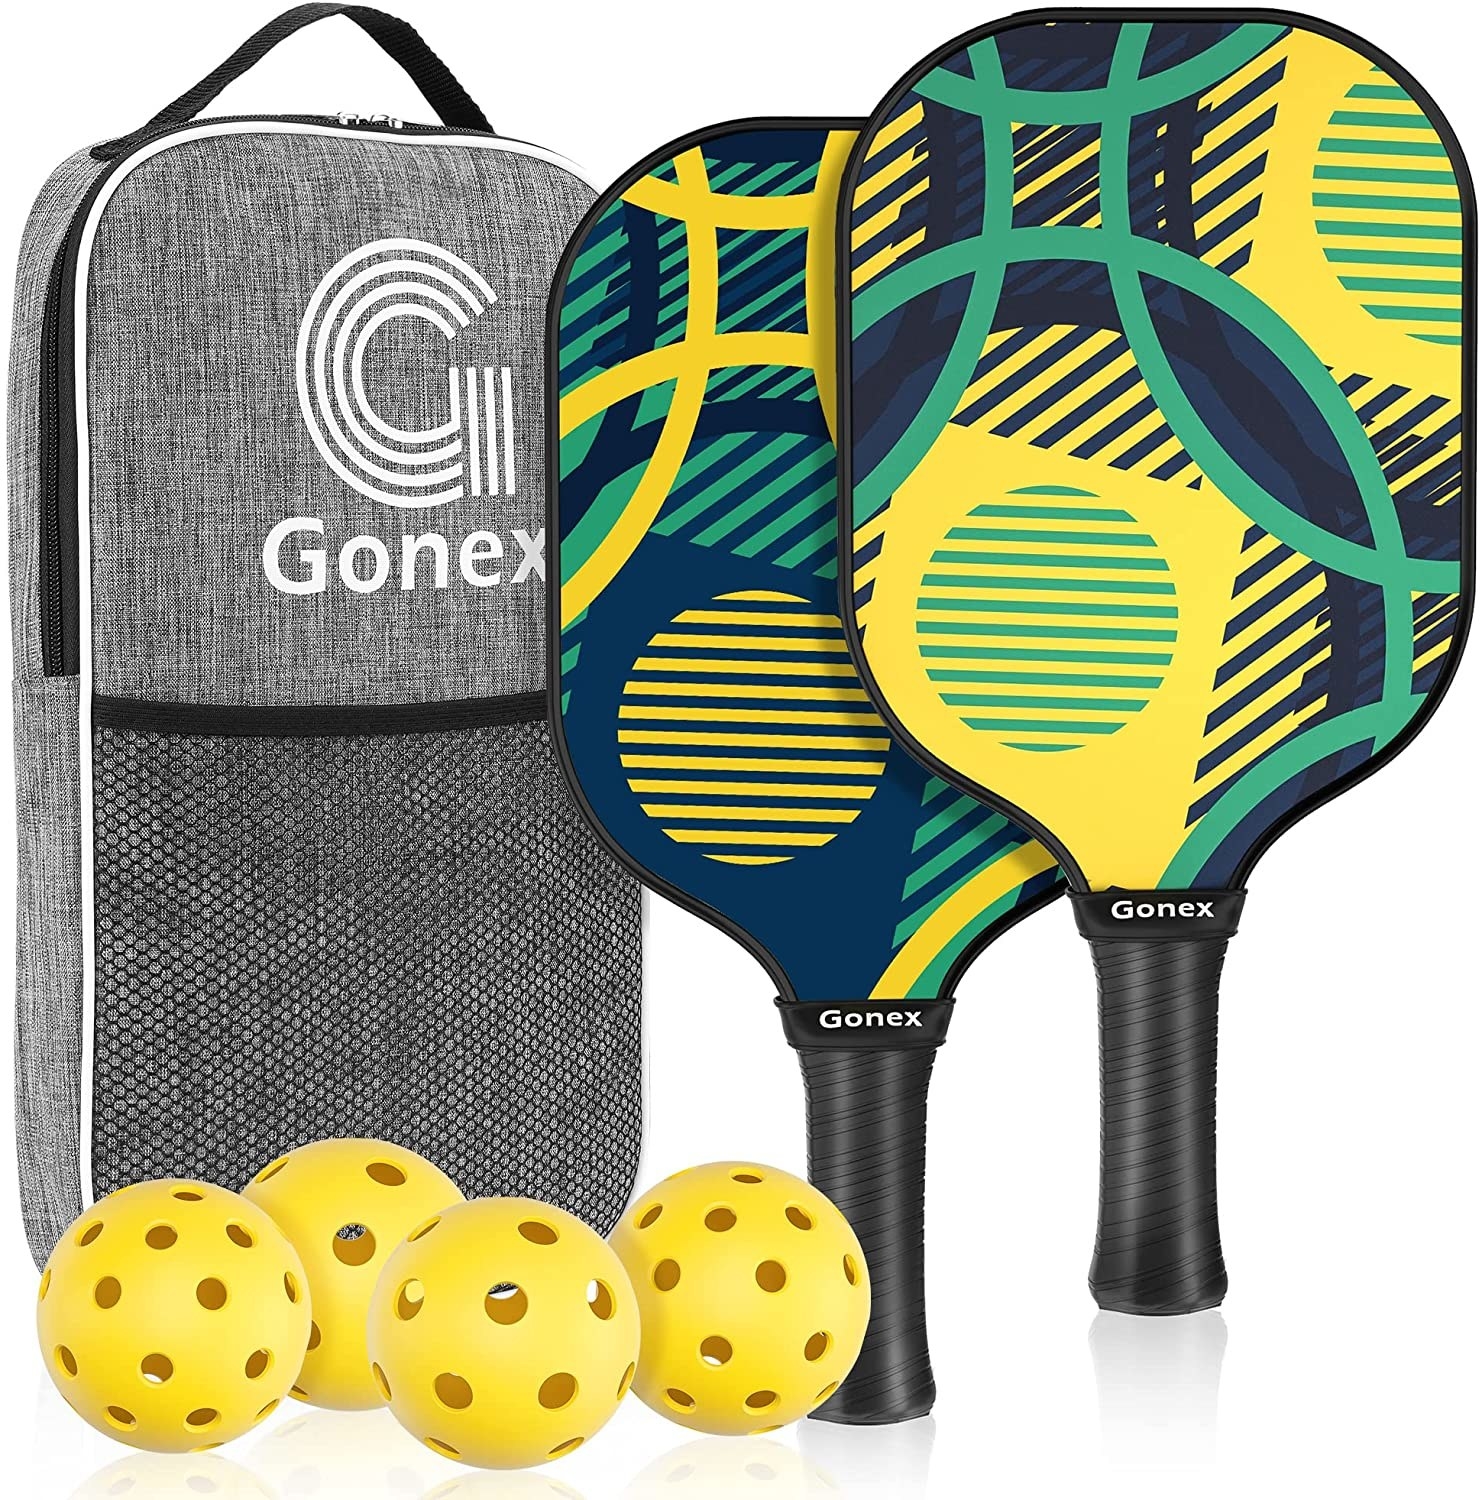 The rackets, balls, and bag on a blank background